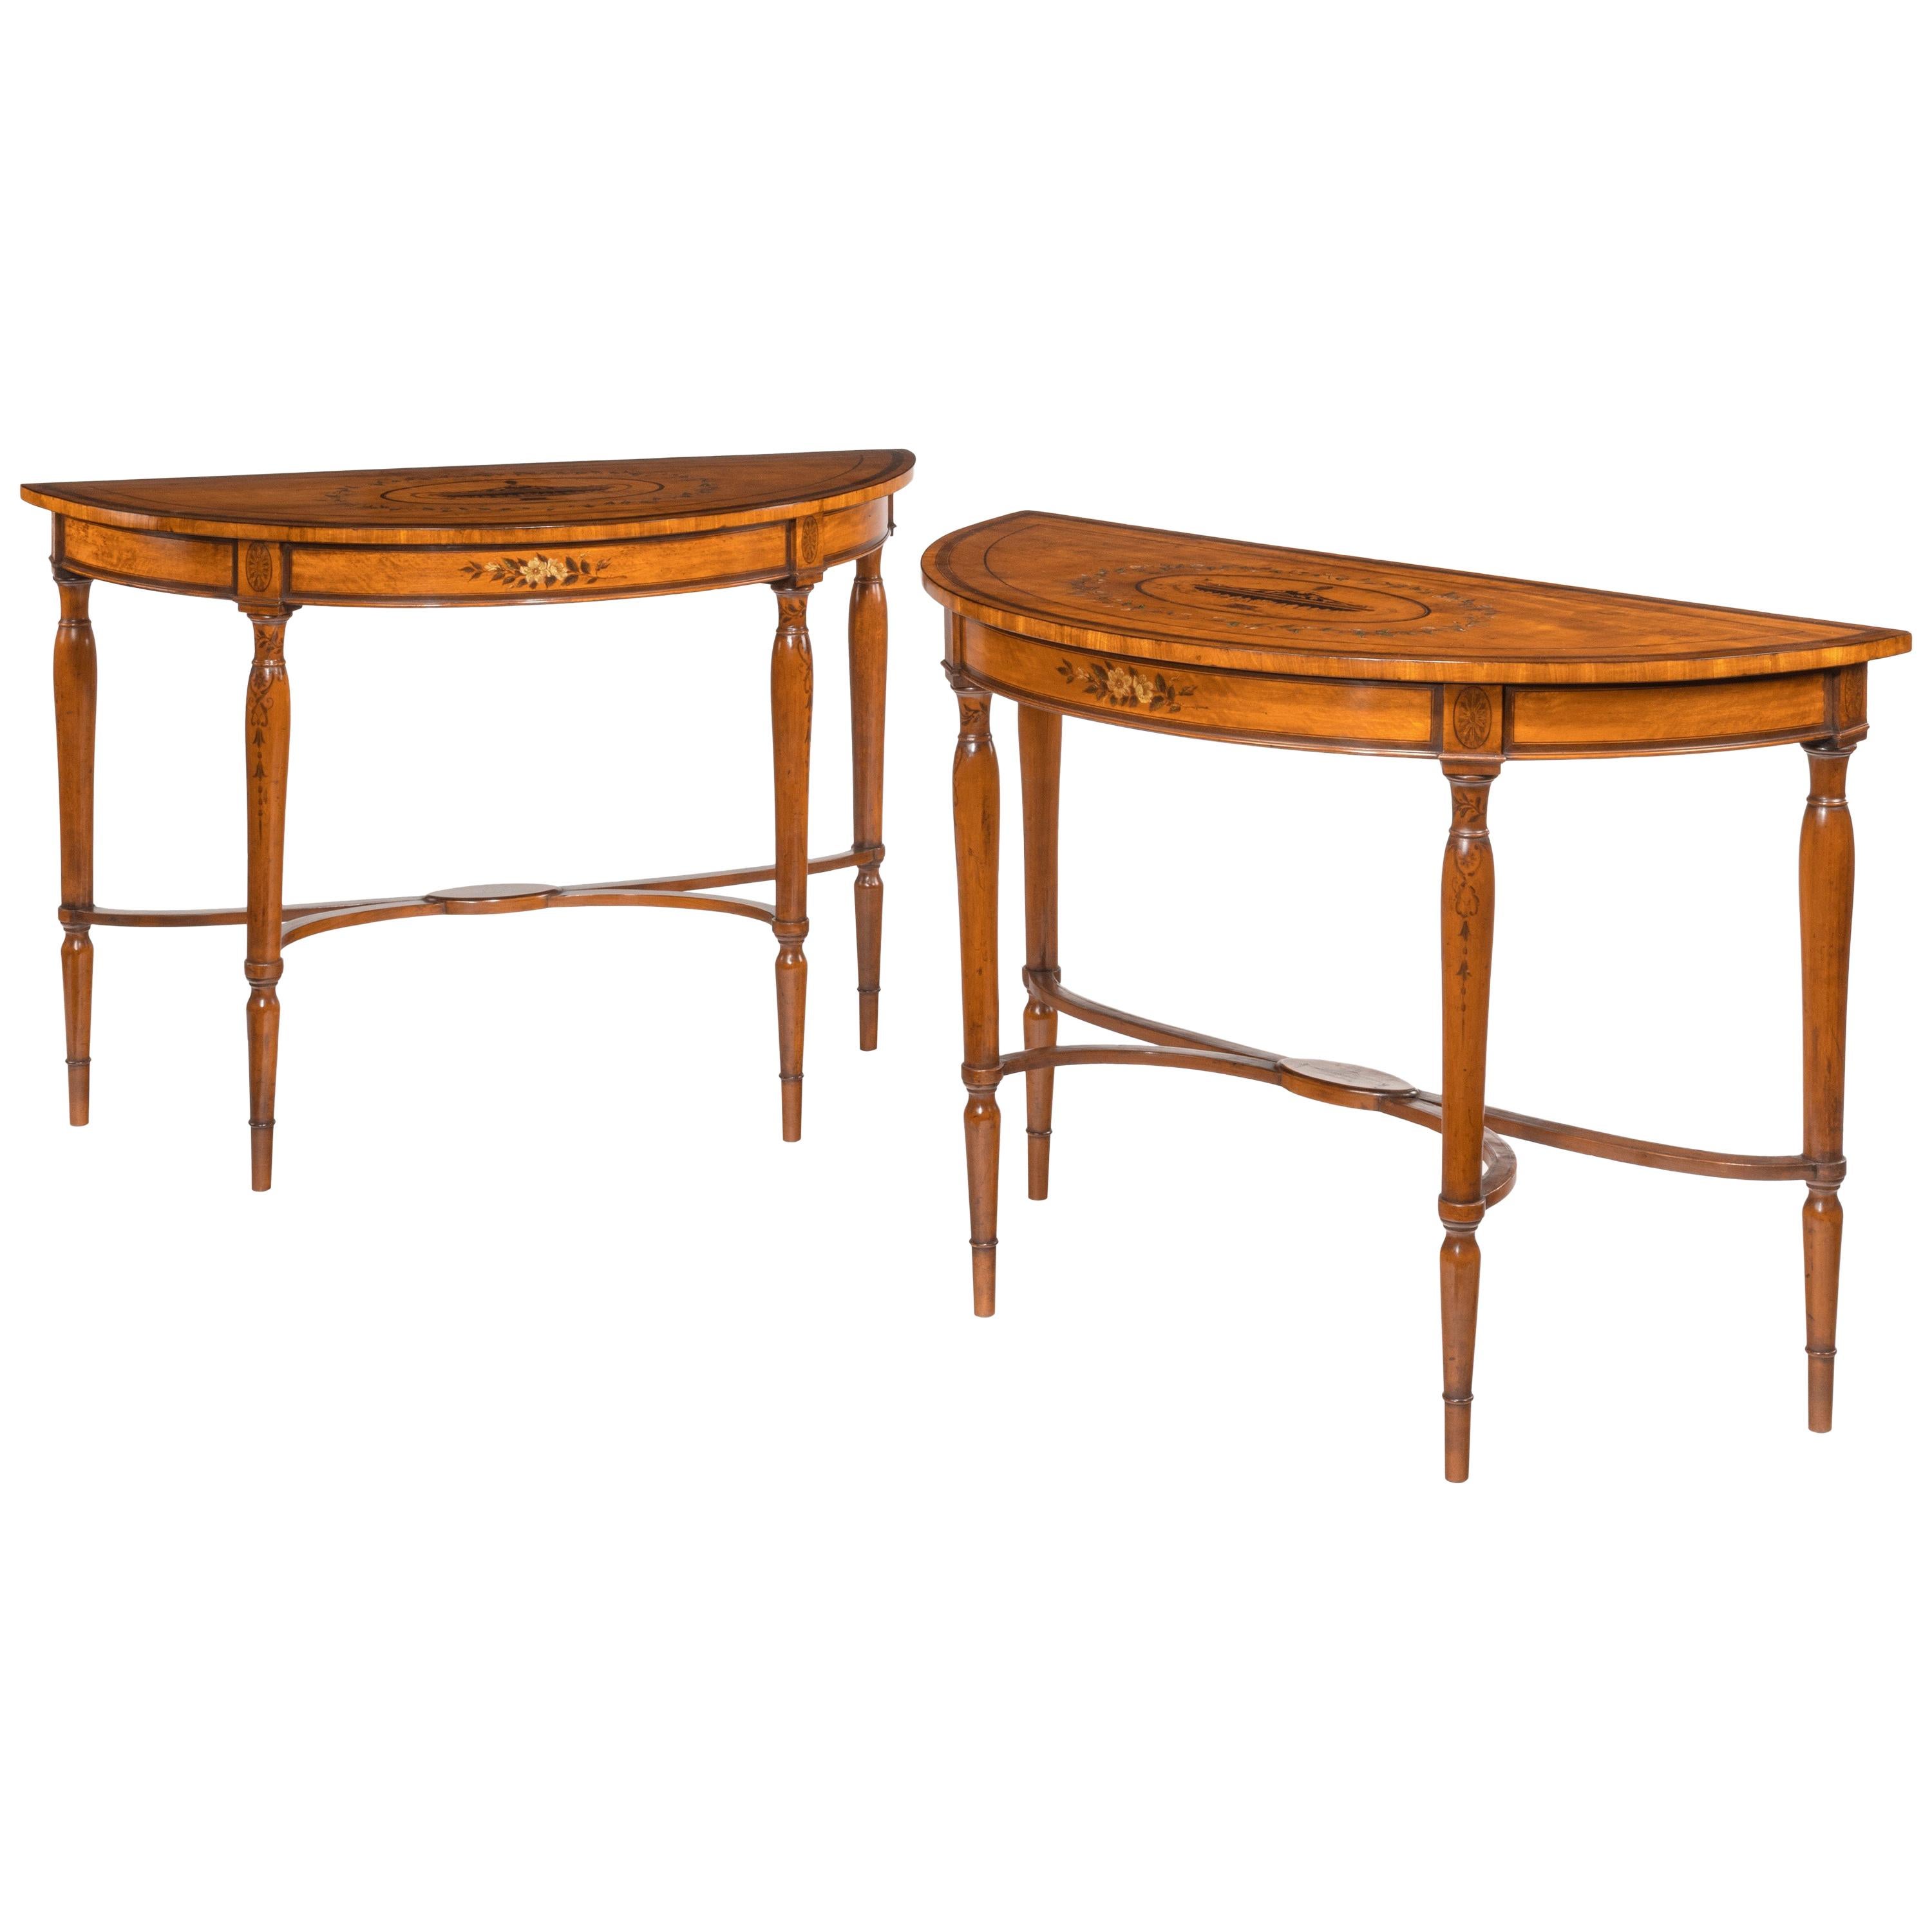 Pair of Sheraton Period West Indian Satinwood Demi Lune Console Tables